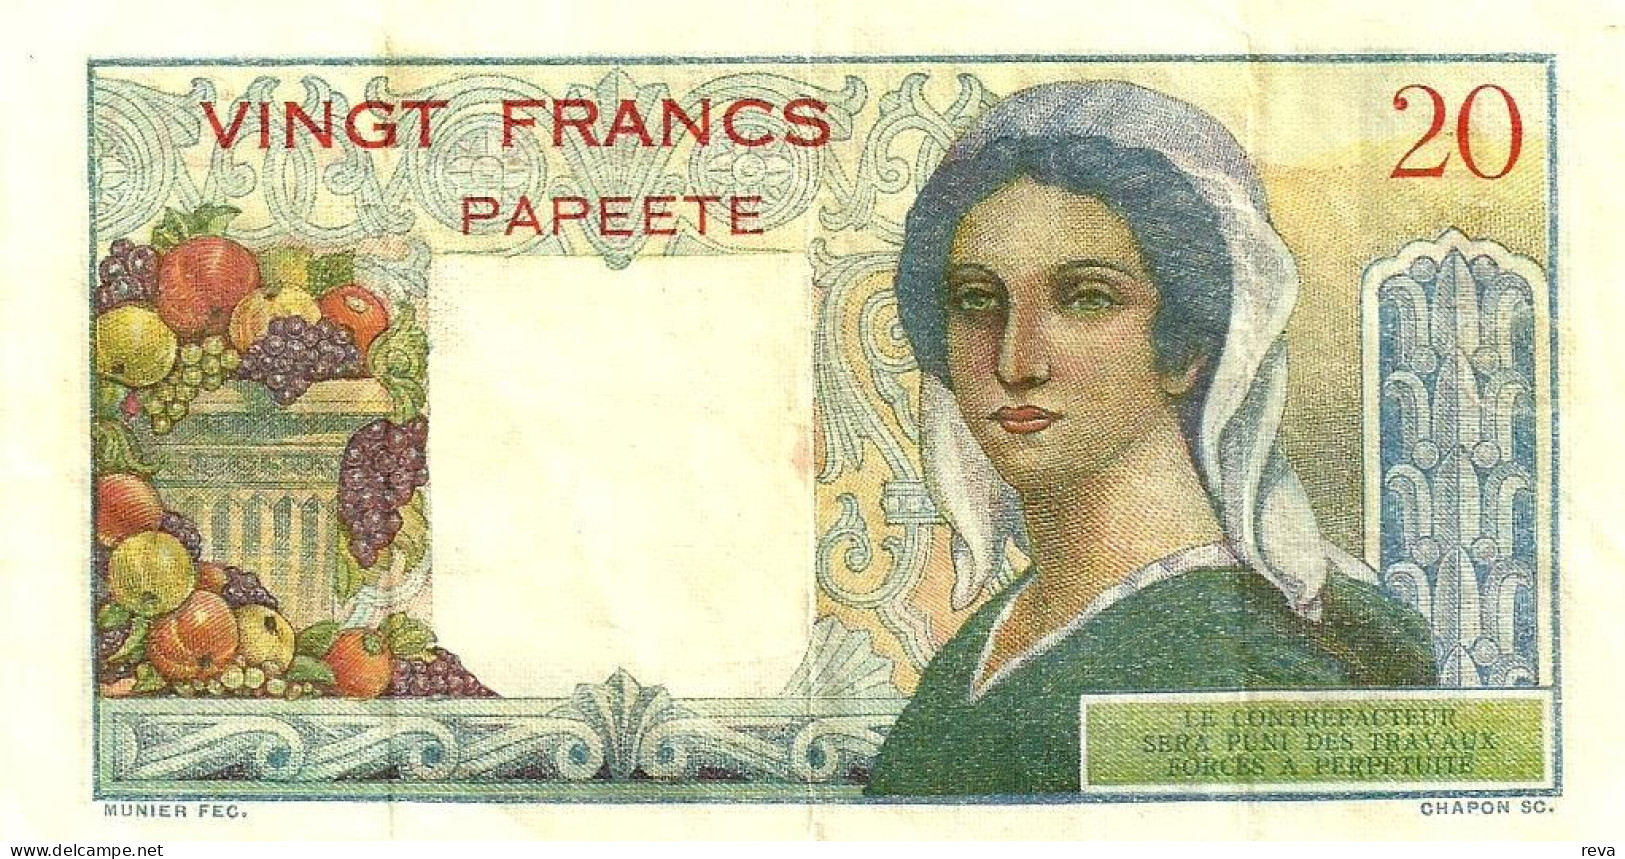 FRENCH POLYNESIA 20 FRANCS GREY MAN HEAD FRONT WOMAN BACK NOT DATED(1963) P21c 3RD SIG VARIETY VF+ READ DESCRIPTION!! - Papeete (Frans-Polynesië 1914-1985)